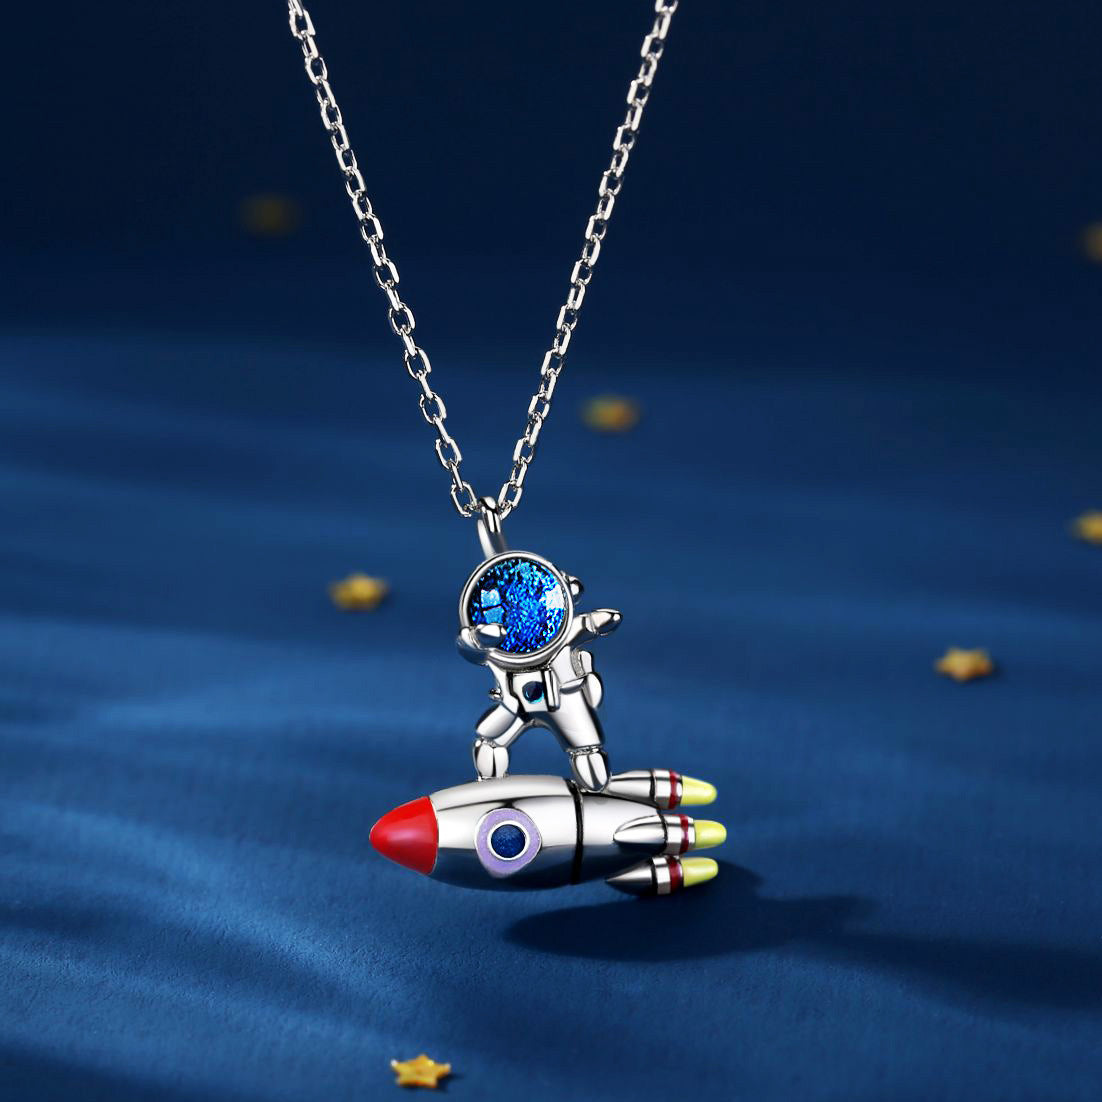 Couple Necklace - Astronaut Rocket S925 Silver Matching Necklaces 